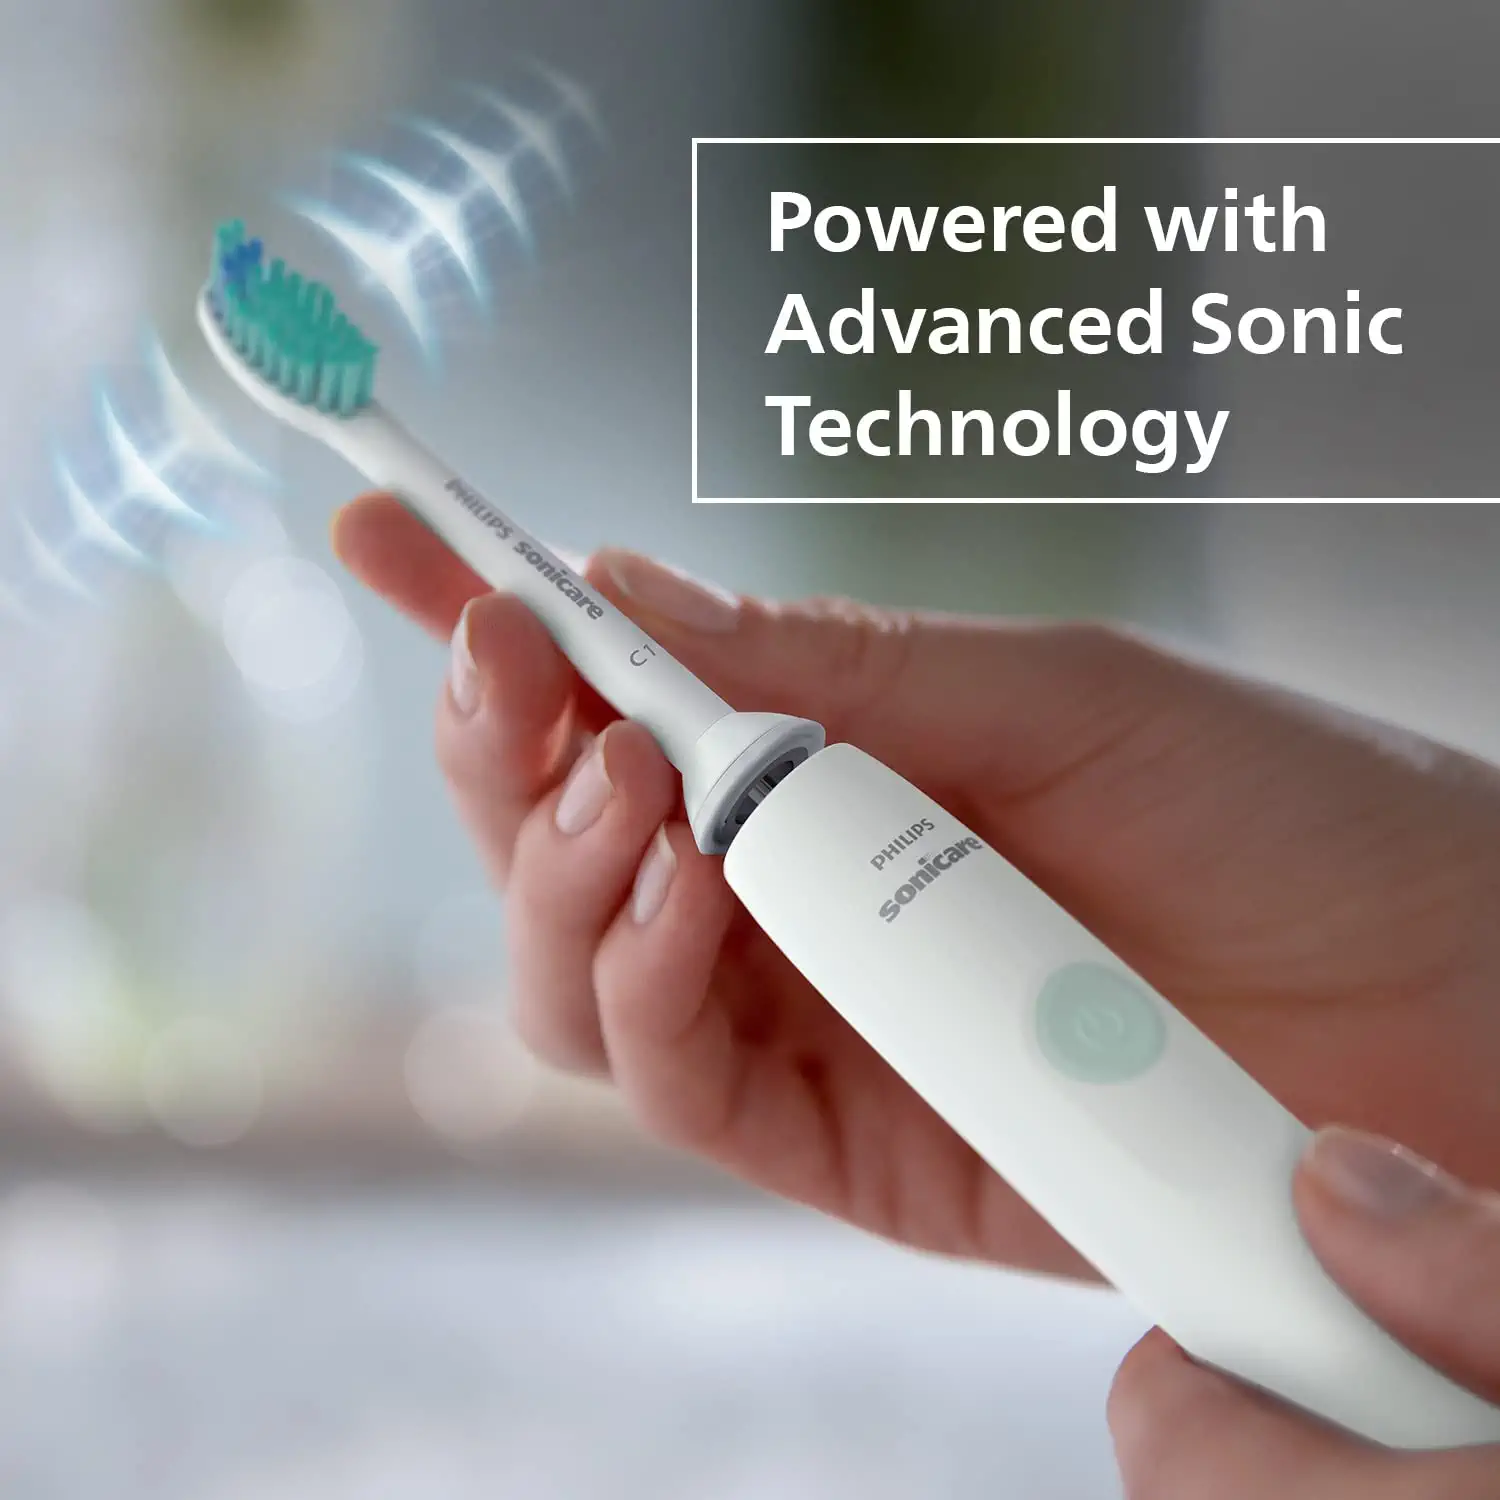 Philips HX3641 Sonicare Electric Toothbrush 1100 Series with Sonic Technology, Up to 3x Plaque Removal